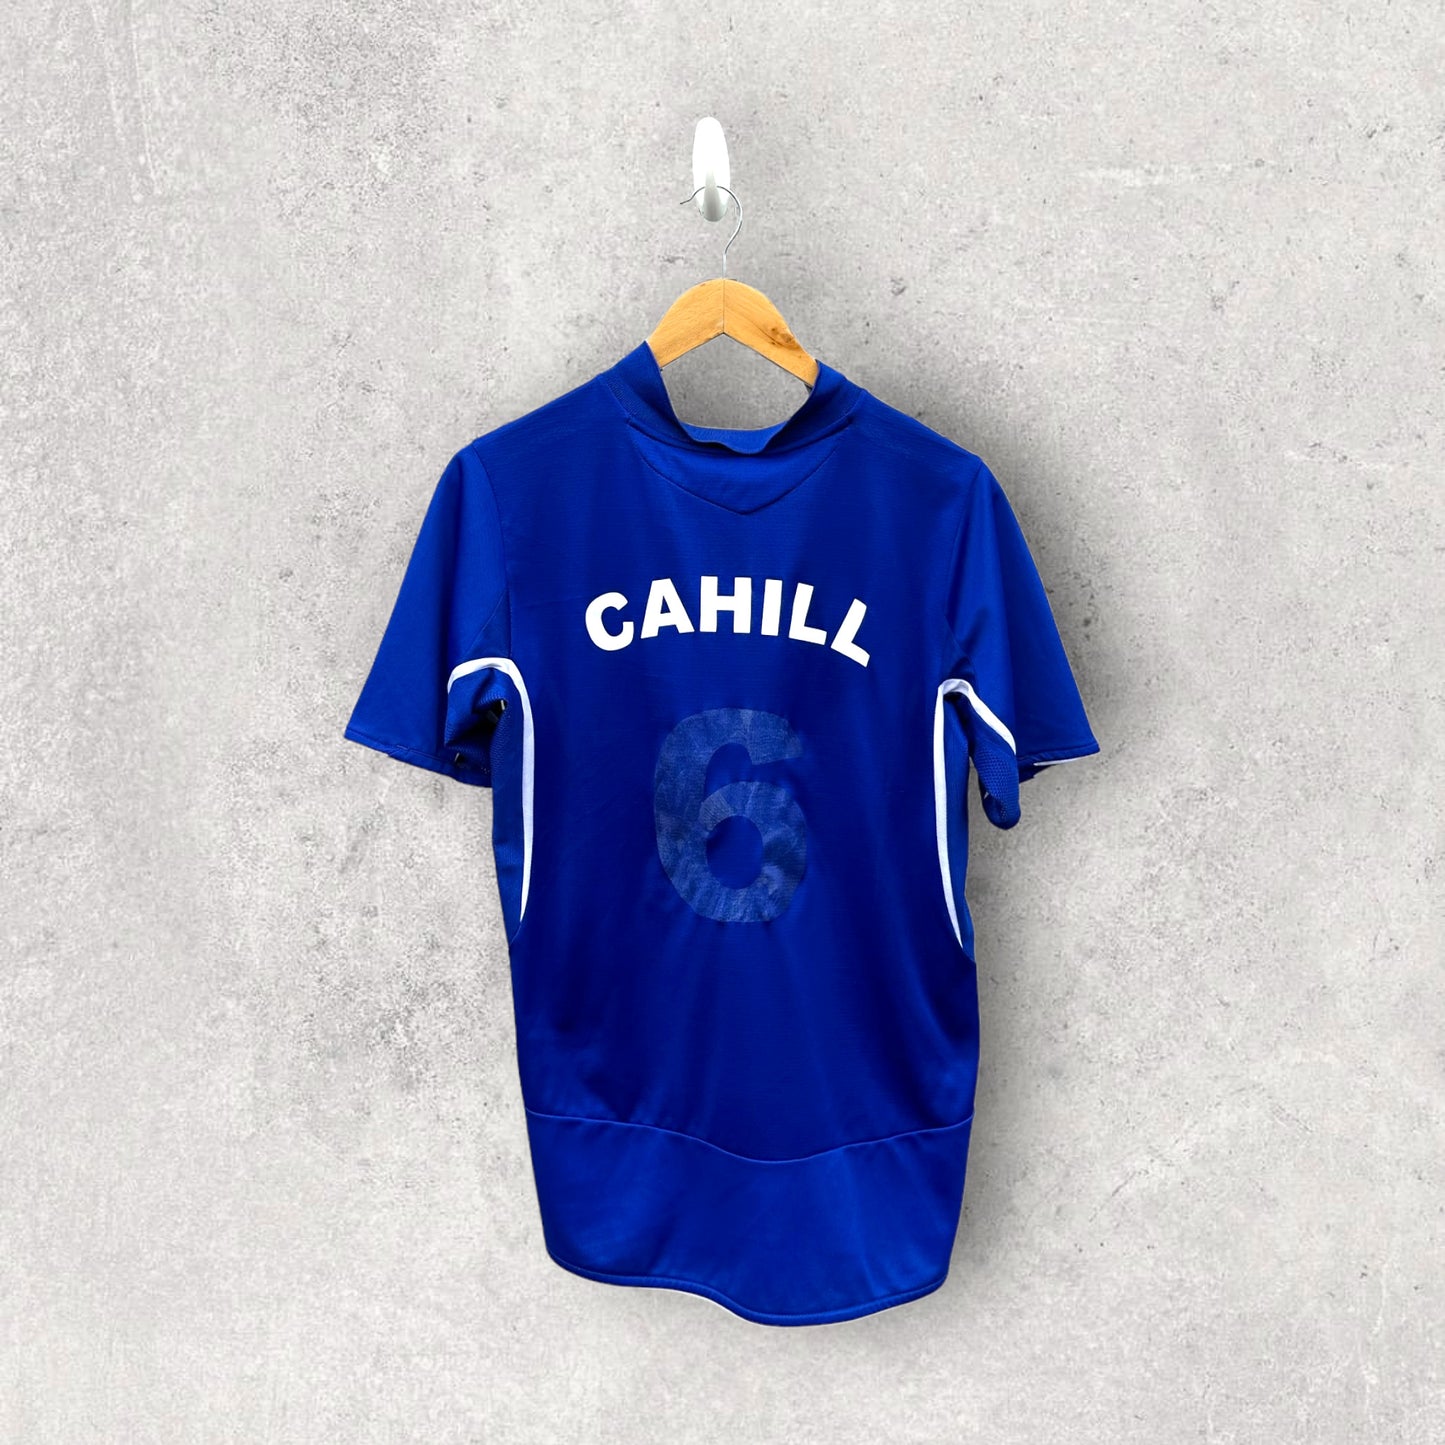 EVERTON 2005-2006 CAHILL HOME JERSEY